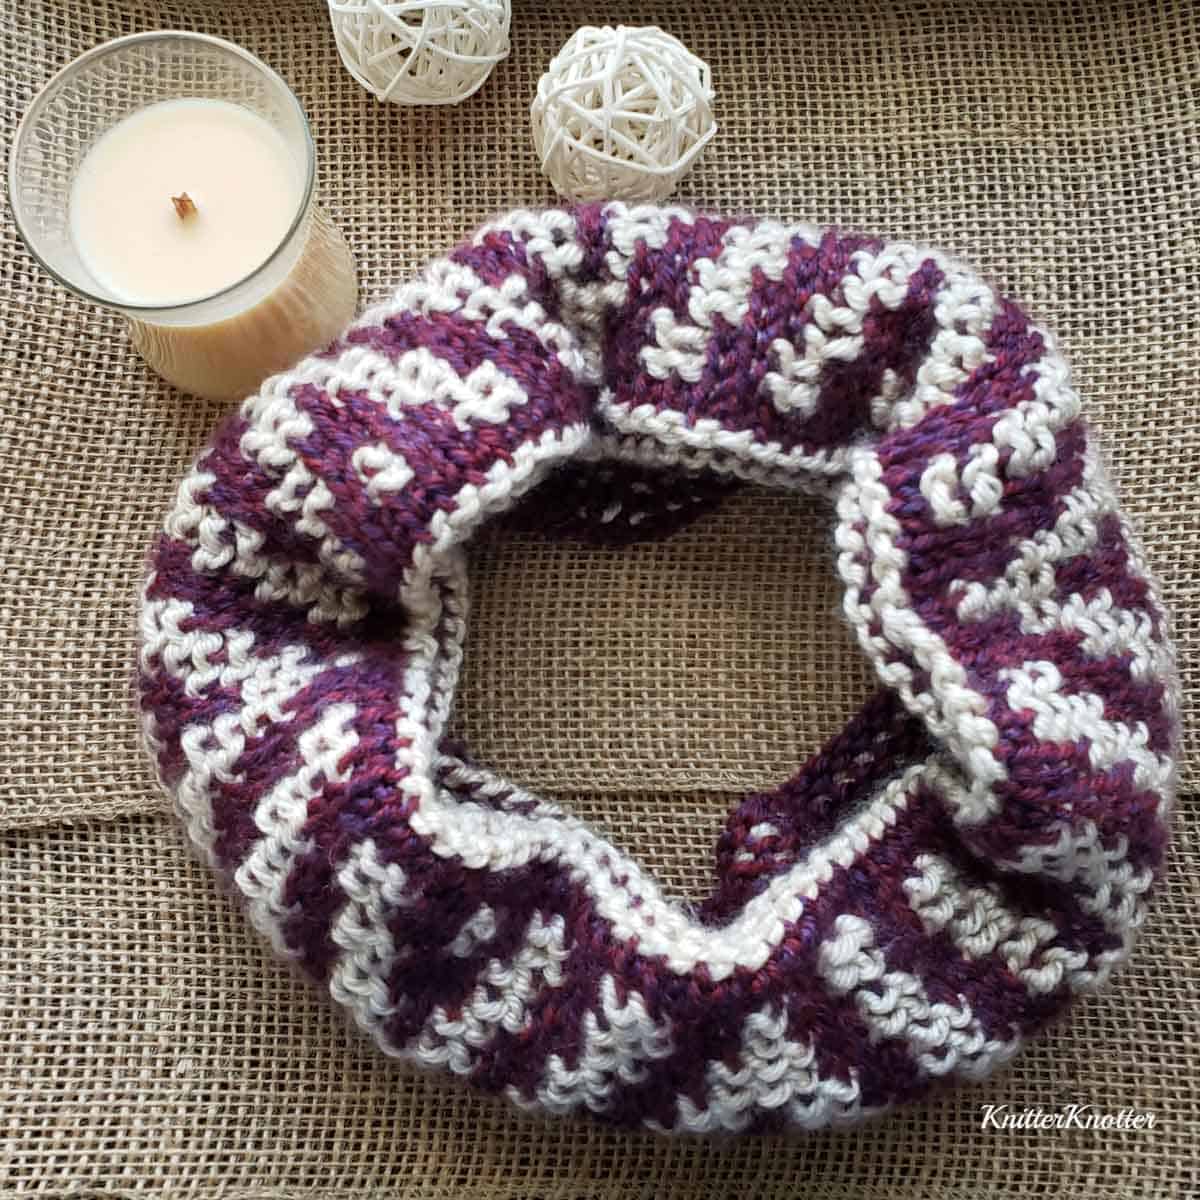 Free crochet pattern for a Tunisian crochet cowl, using basic Tunisian stitches. Made with Lion Brand yarn.